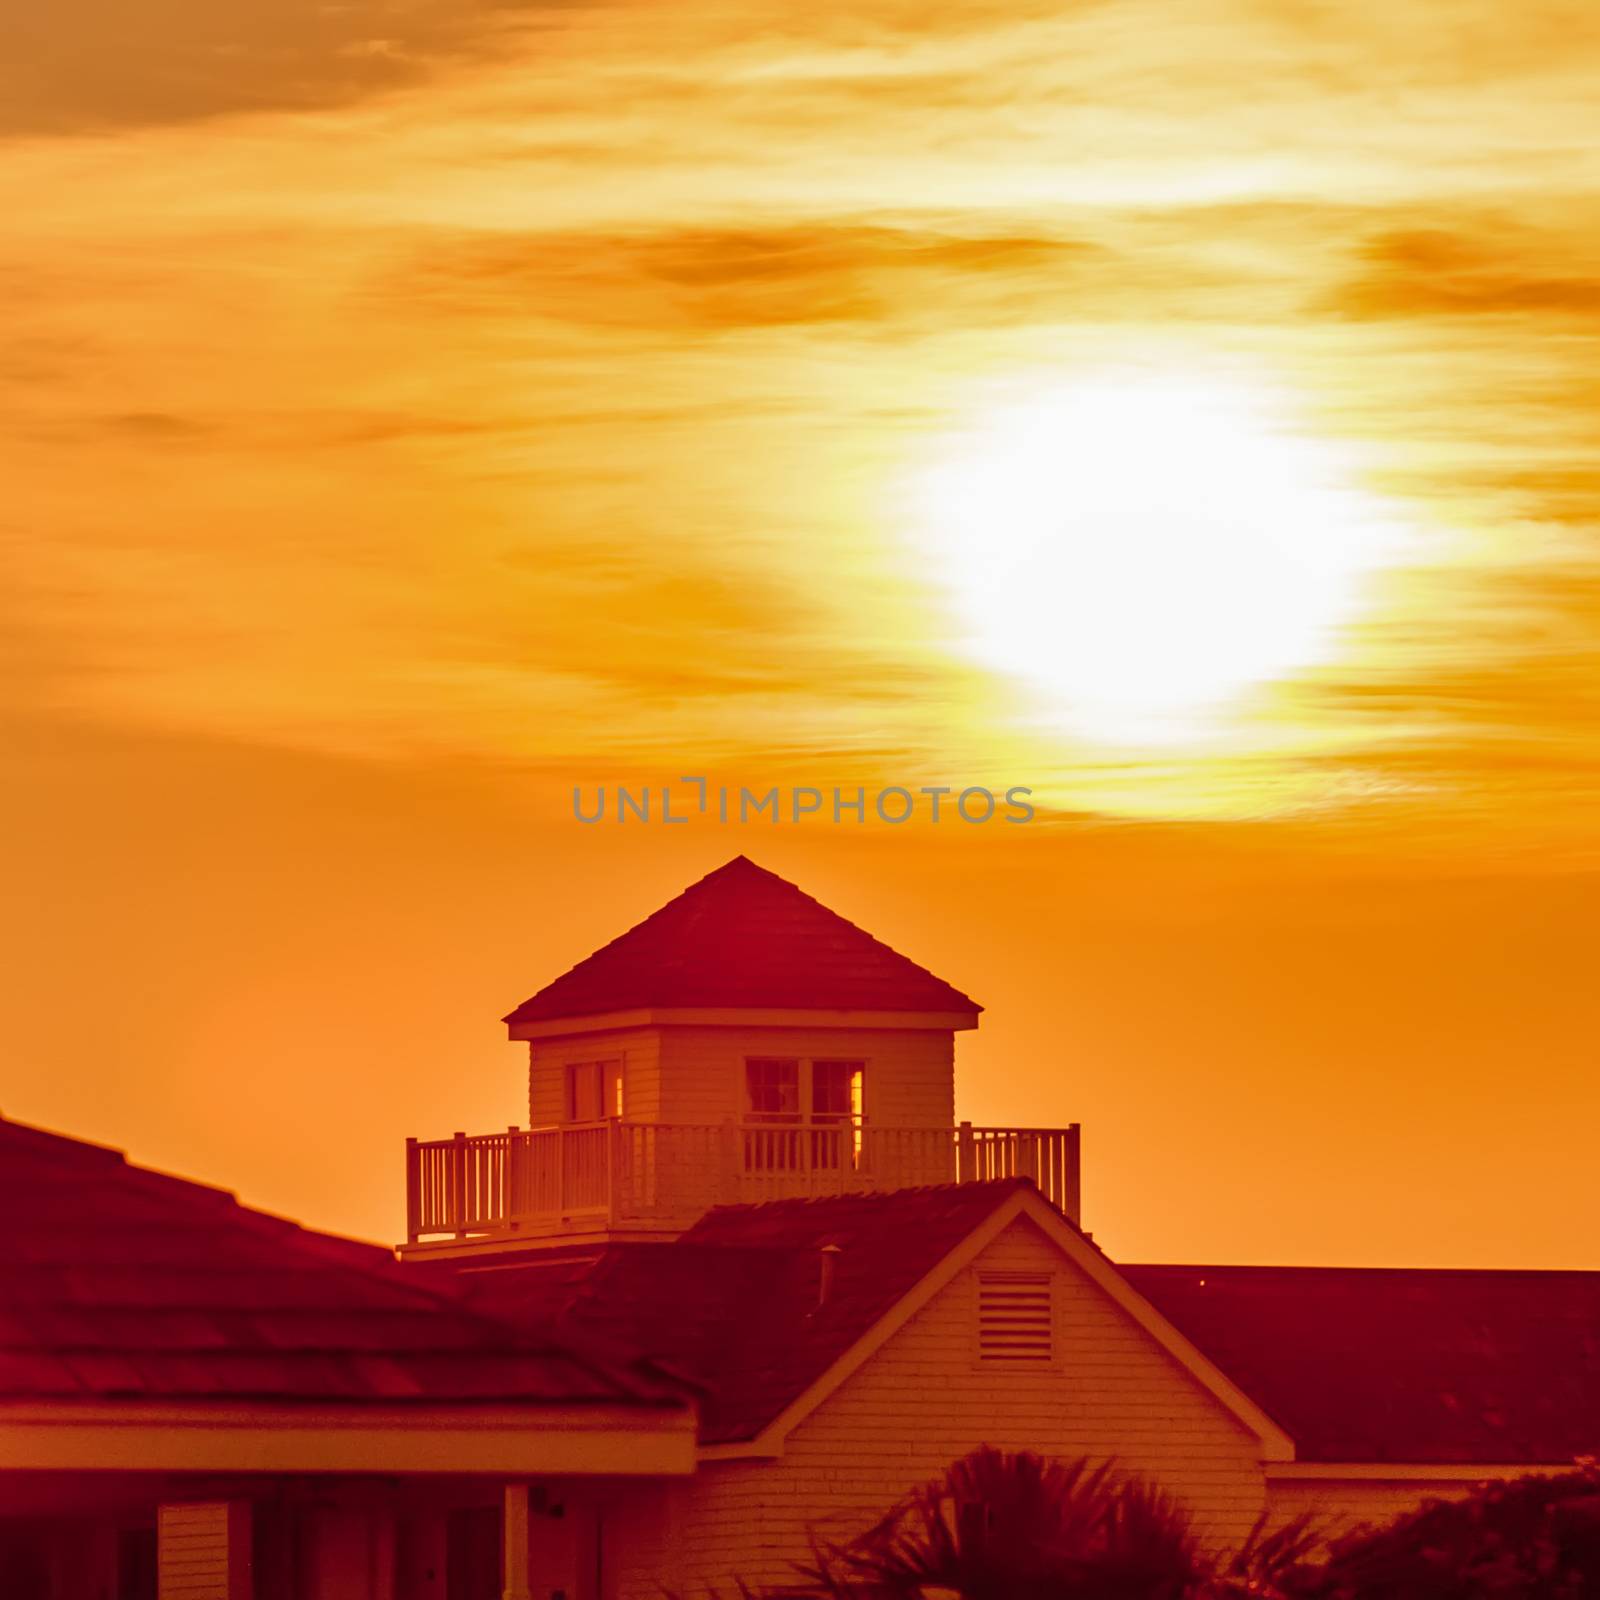 buildings silhouettes at sunrise on cape hatteras natinal seasho by digidreamgrafix